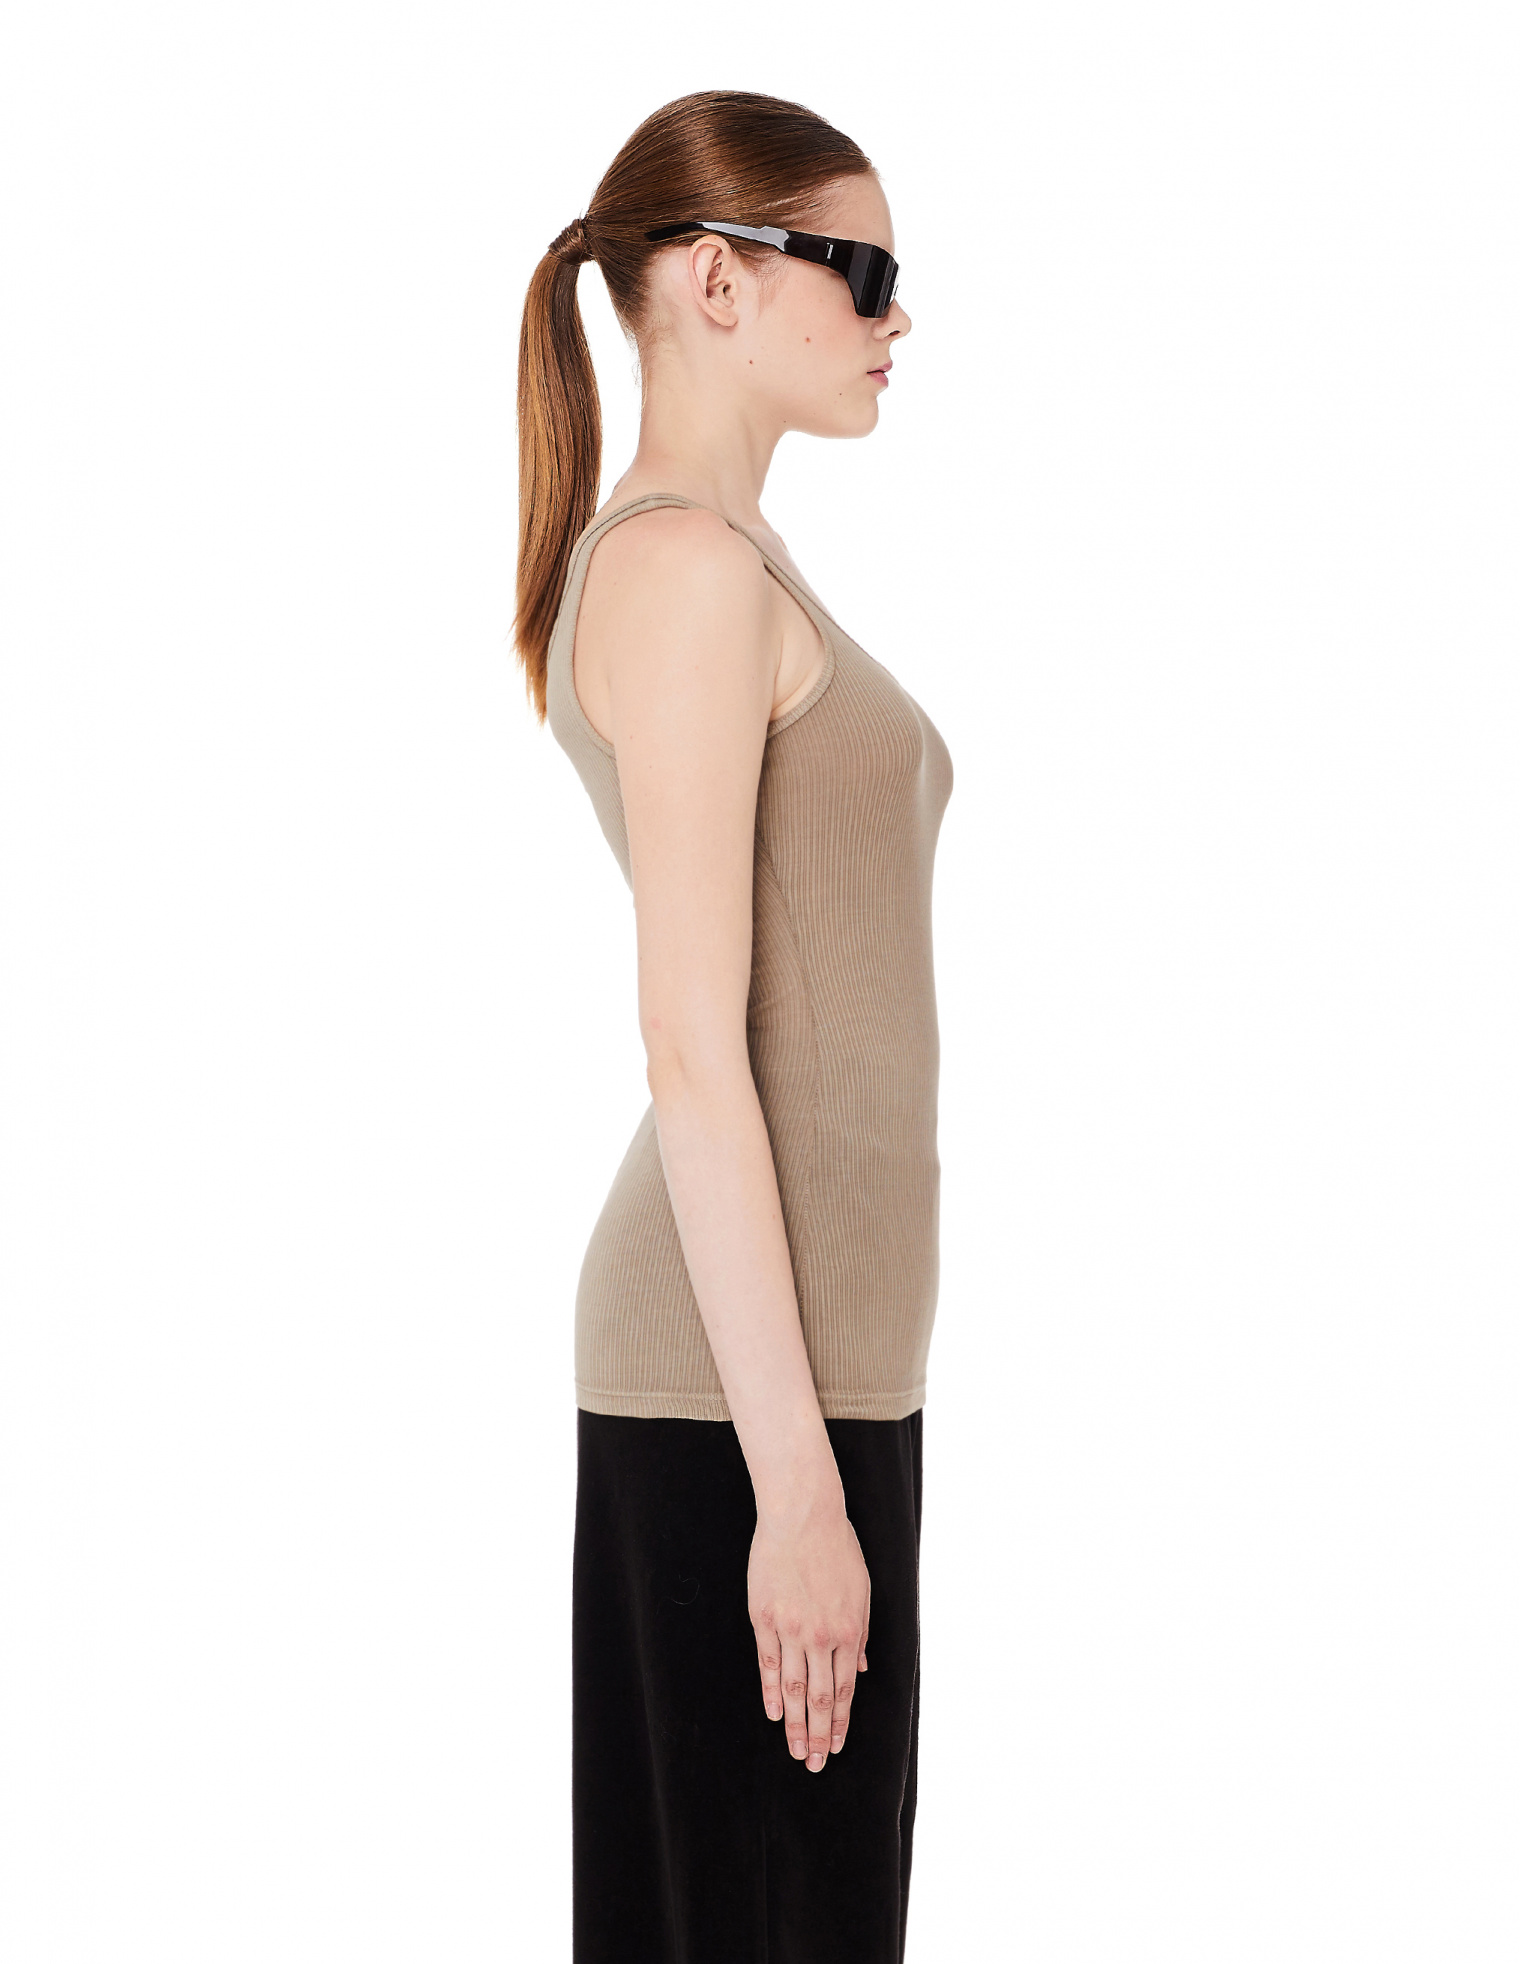 James Perse Brown Ribbed Cotton Tank Top